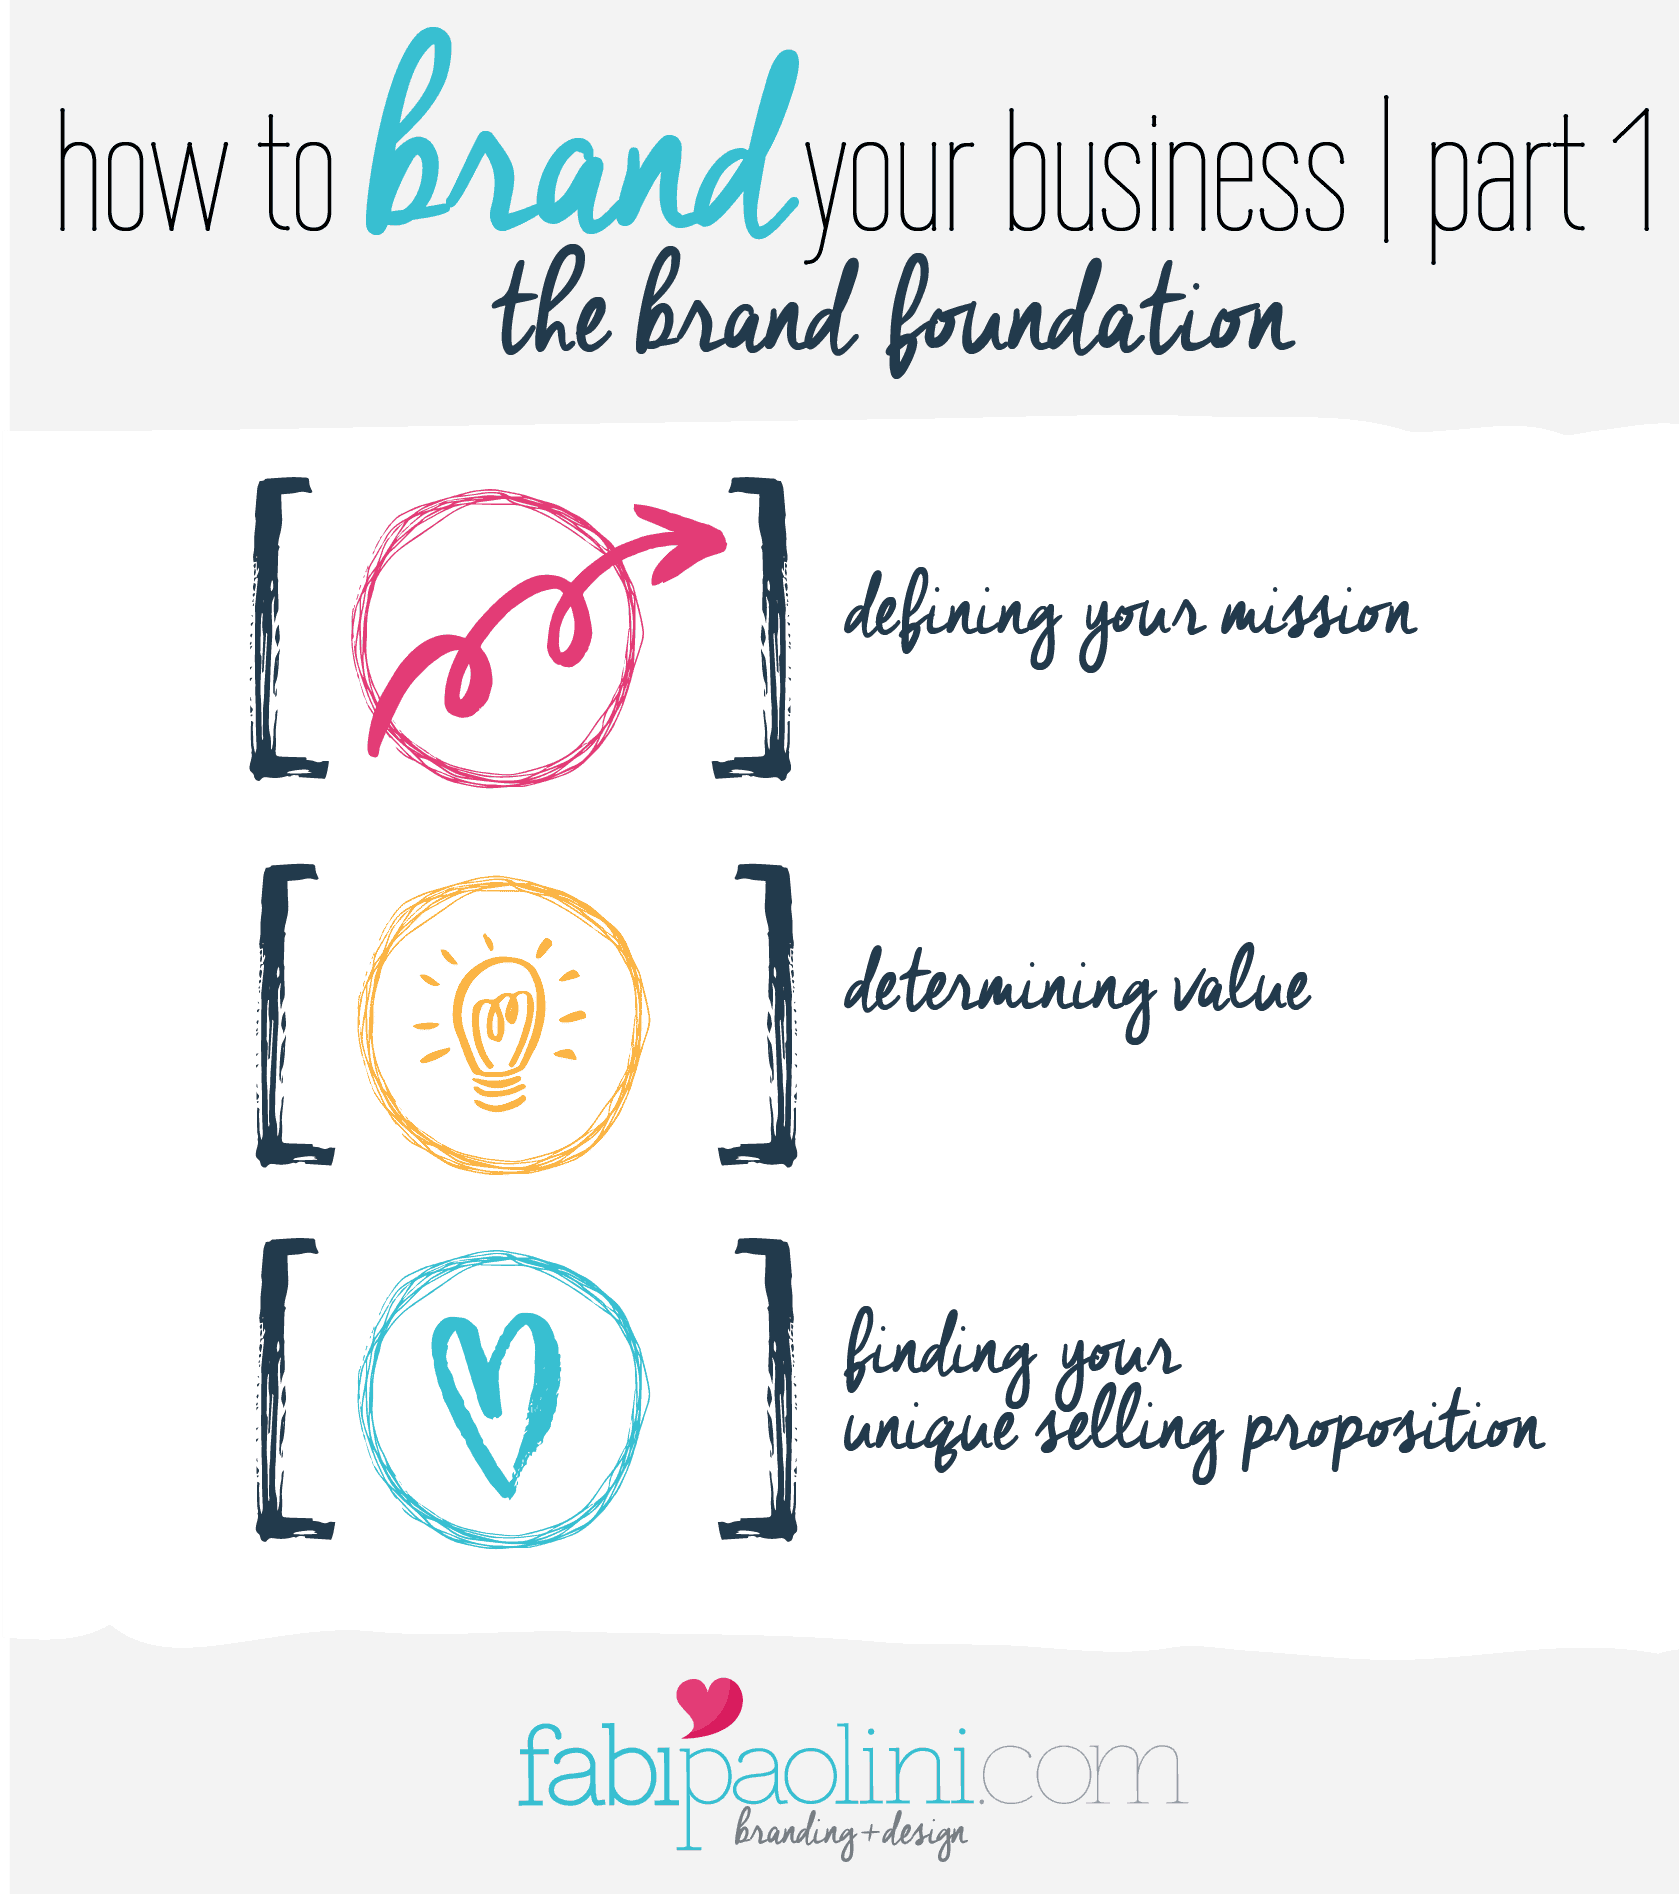 How to brand your business. The brand foundation. Mission, value, unique selling proposition. Branding + design